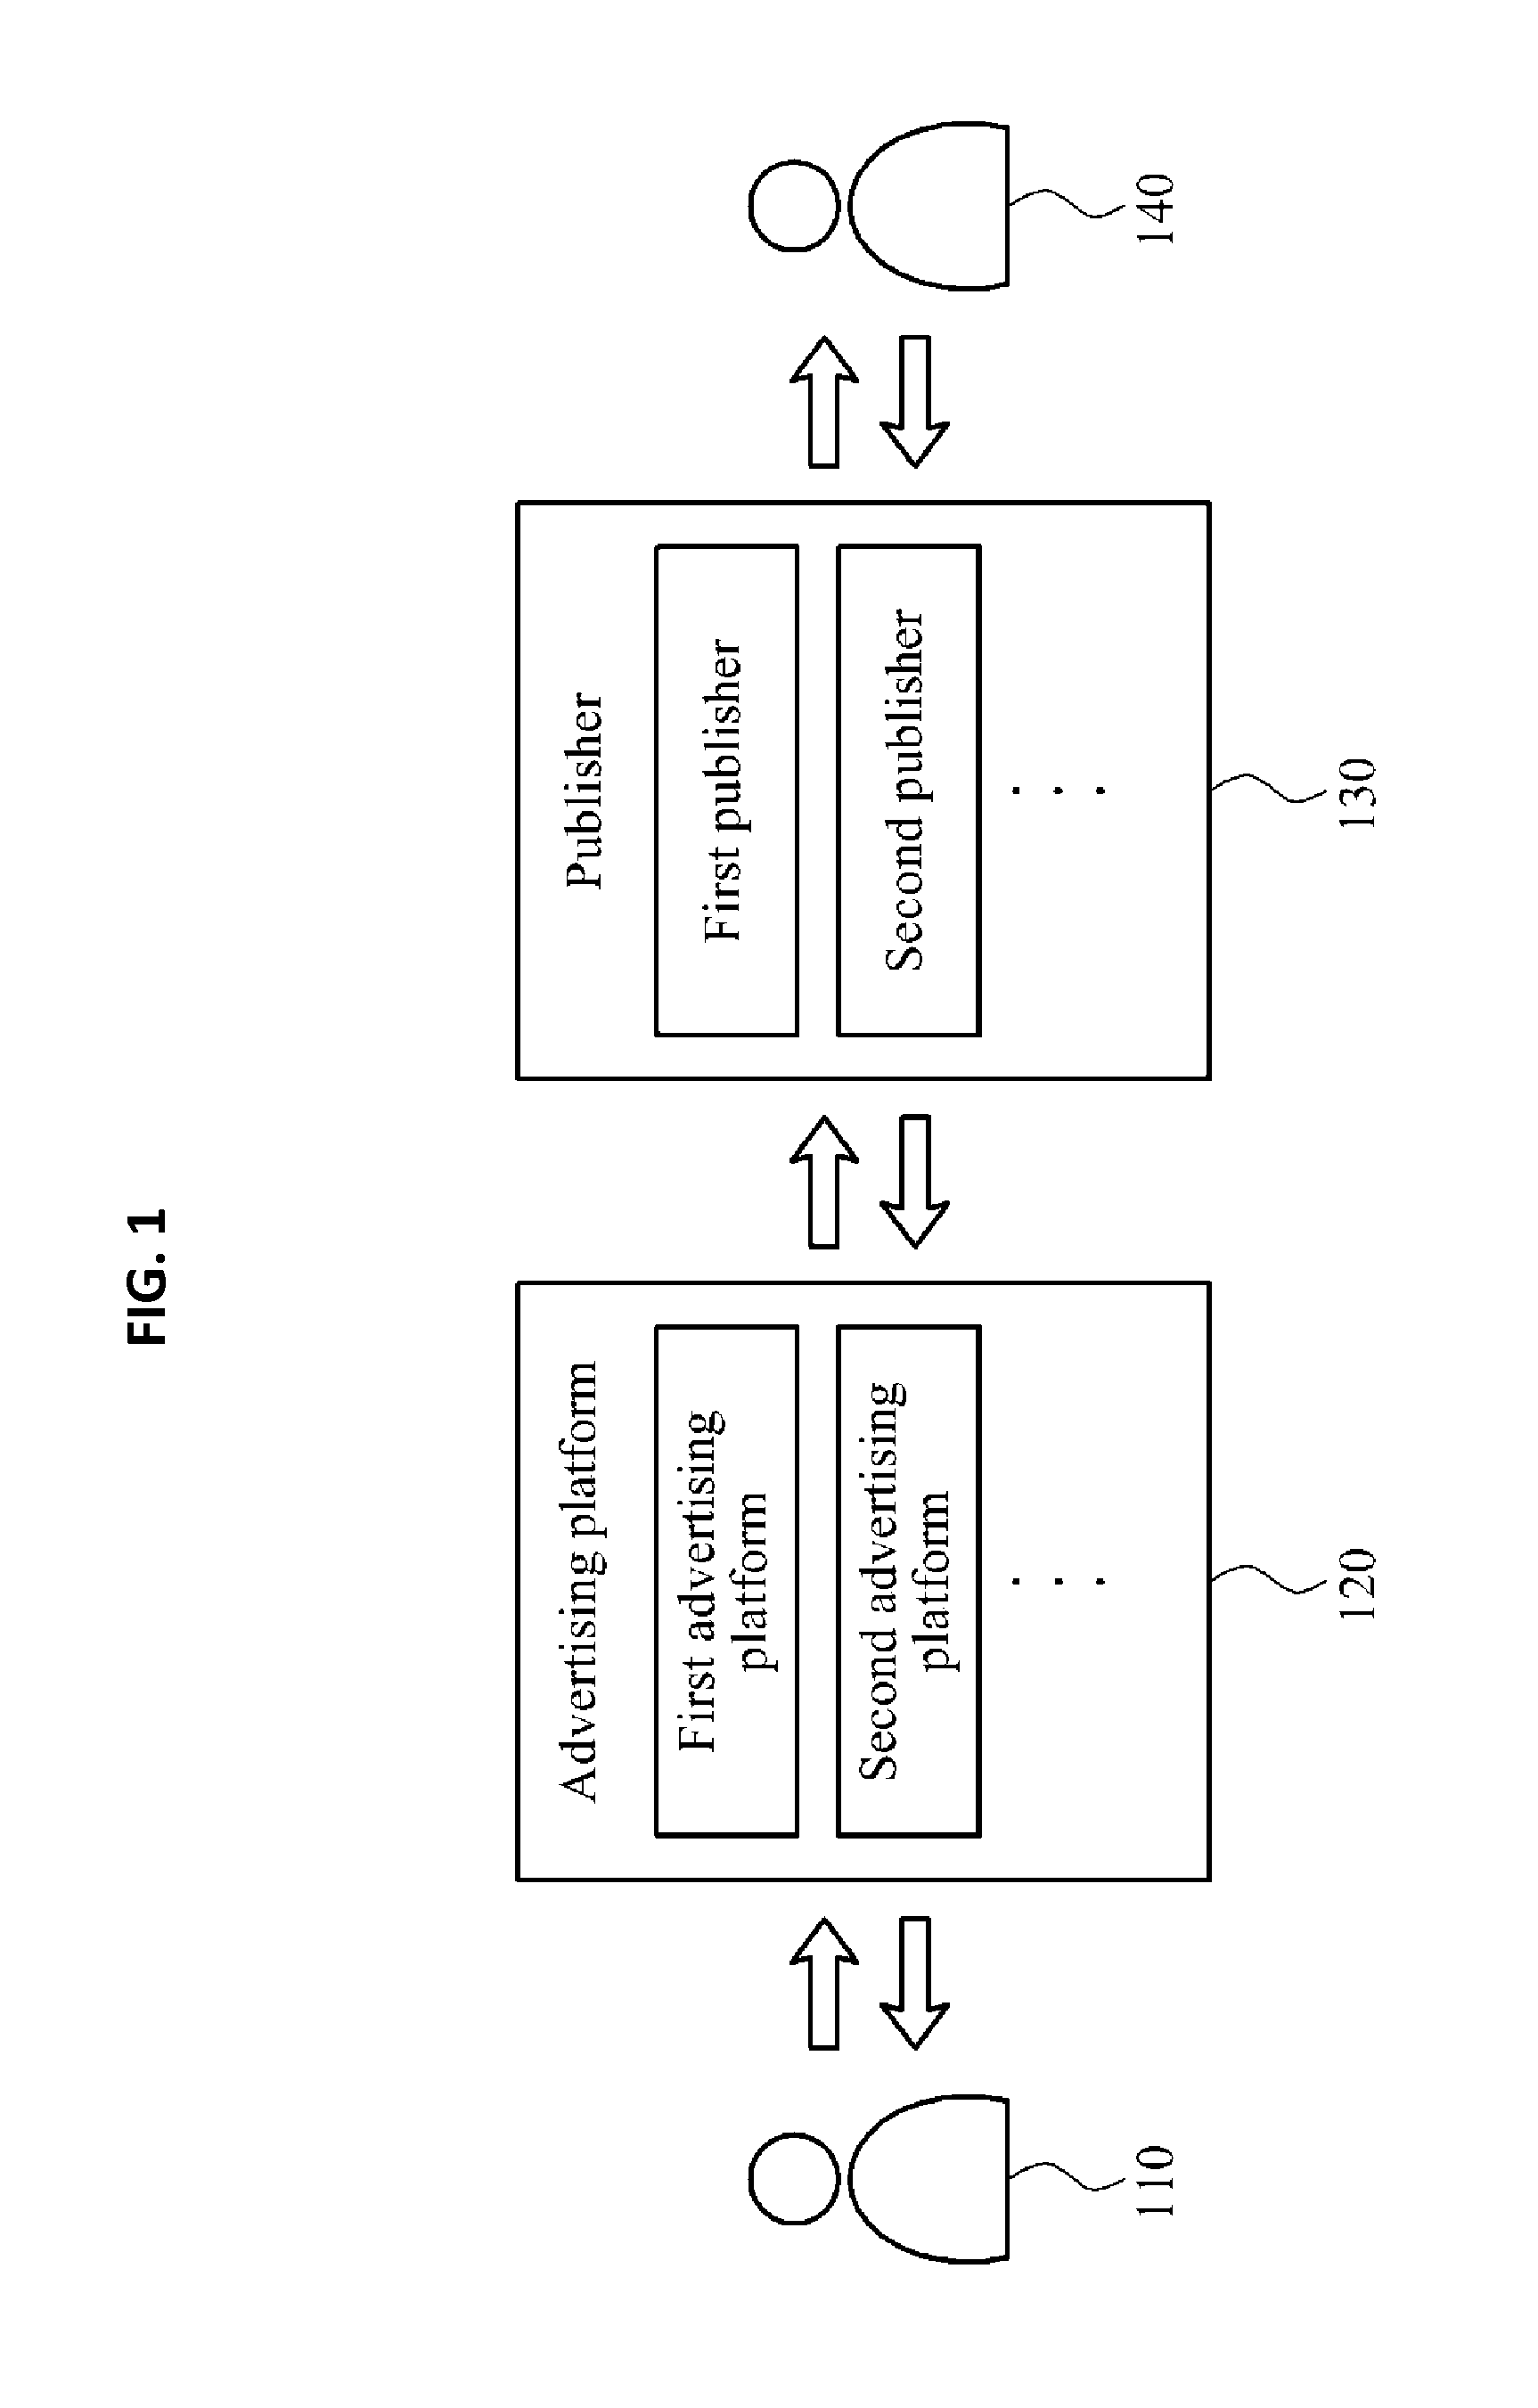 System and method for controlling advertisement based on user benefit